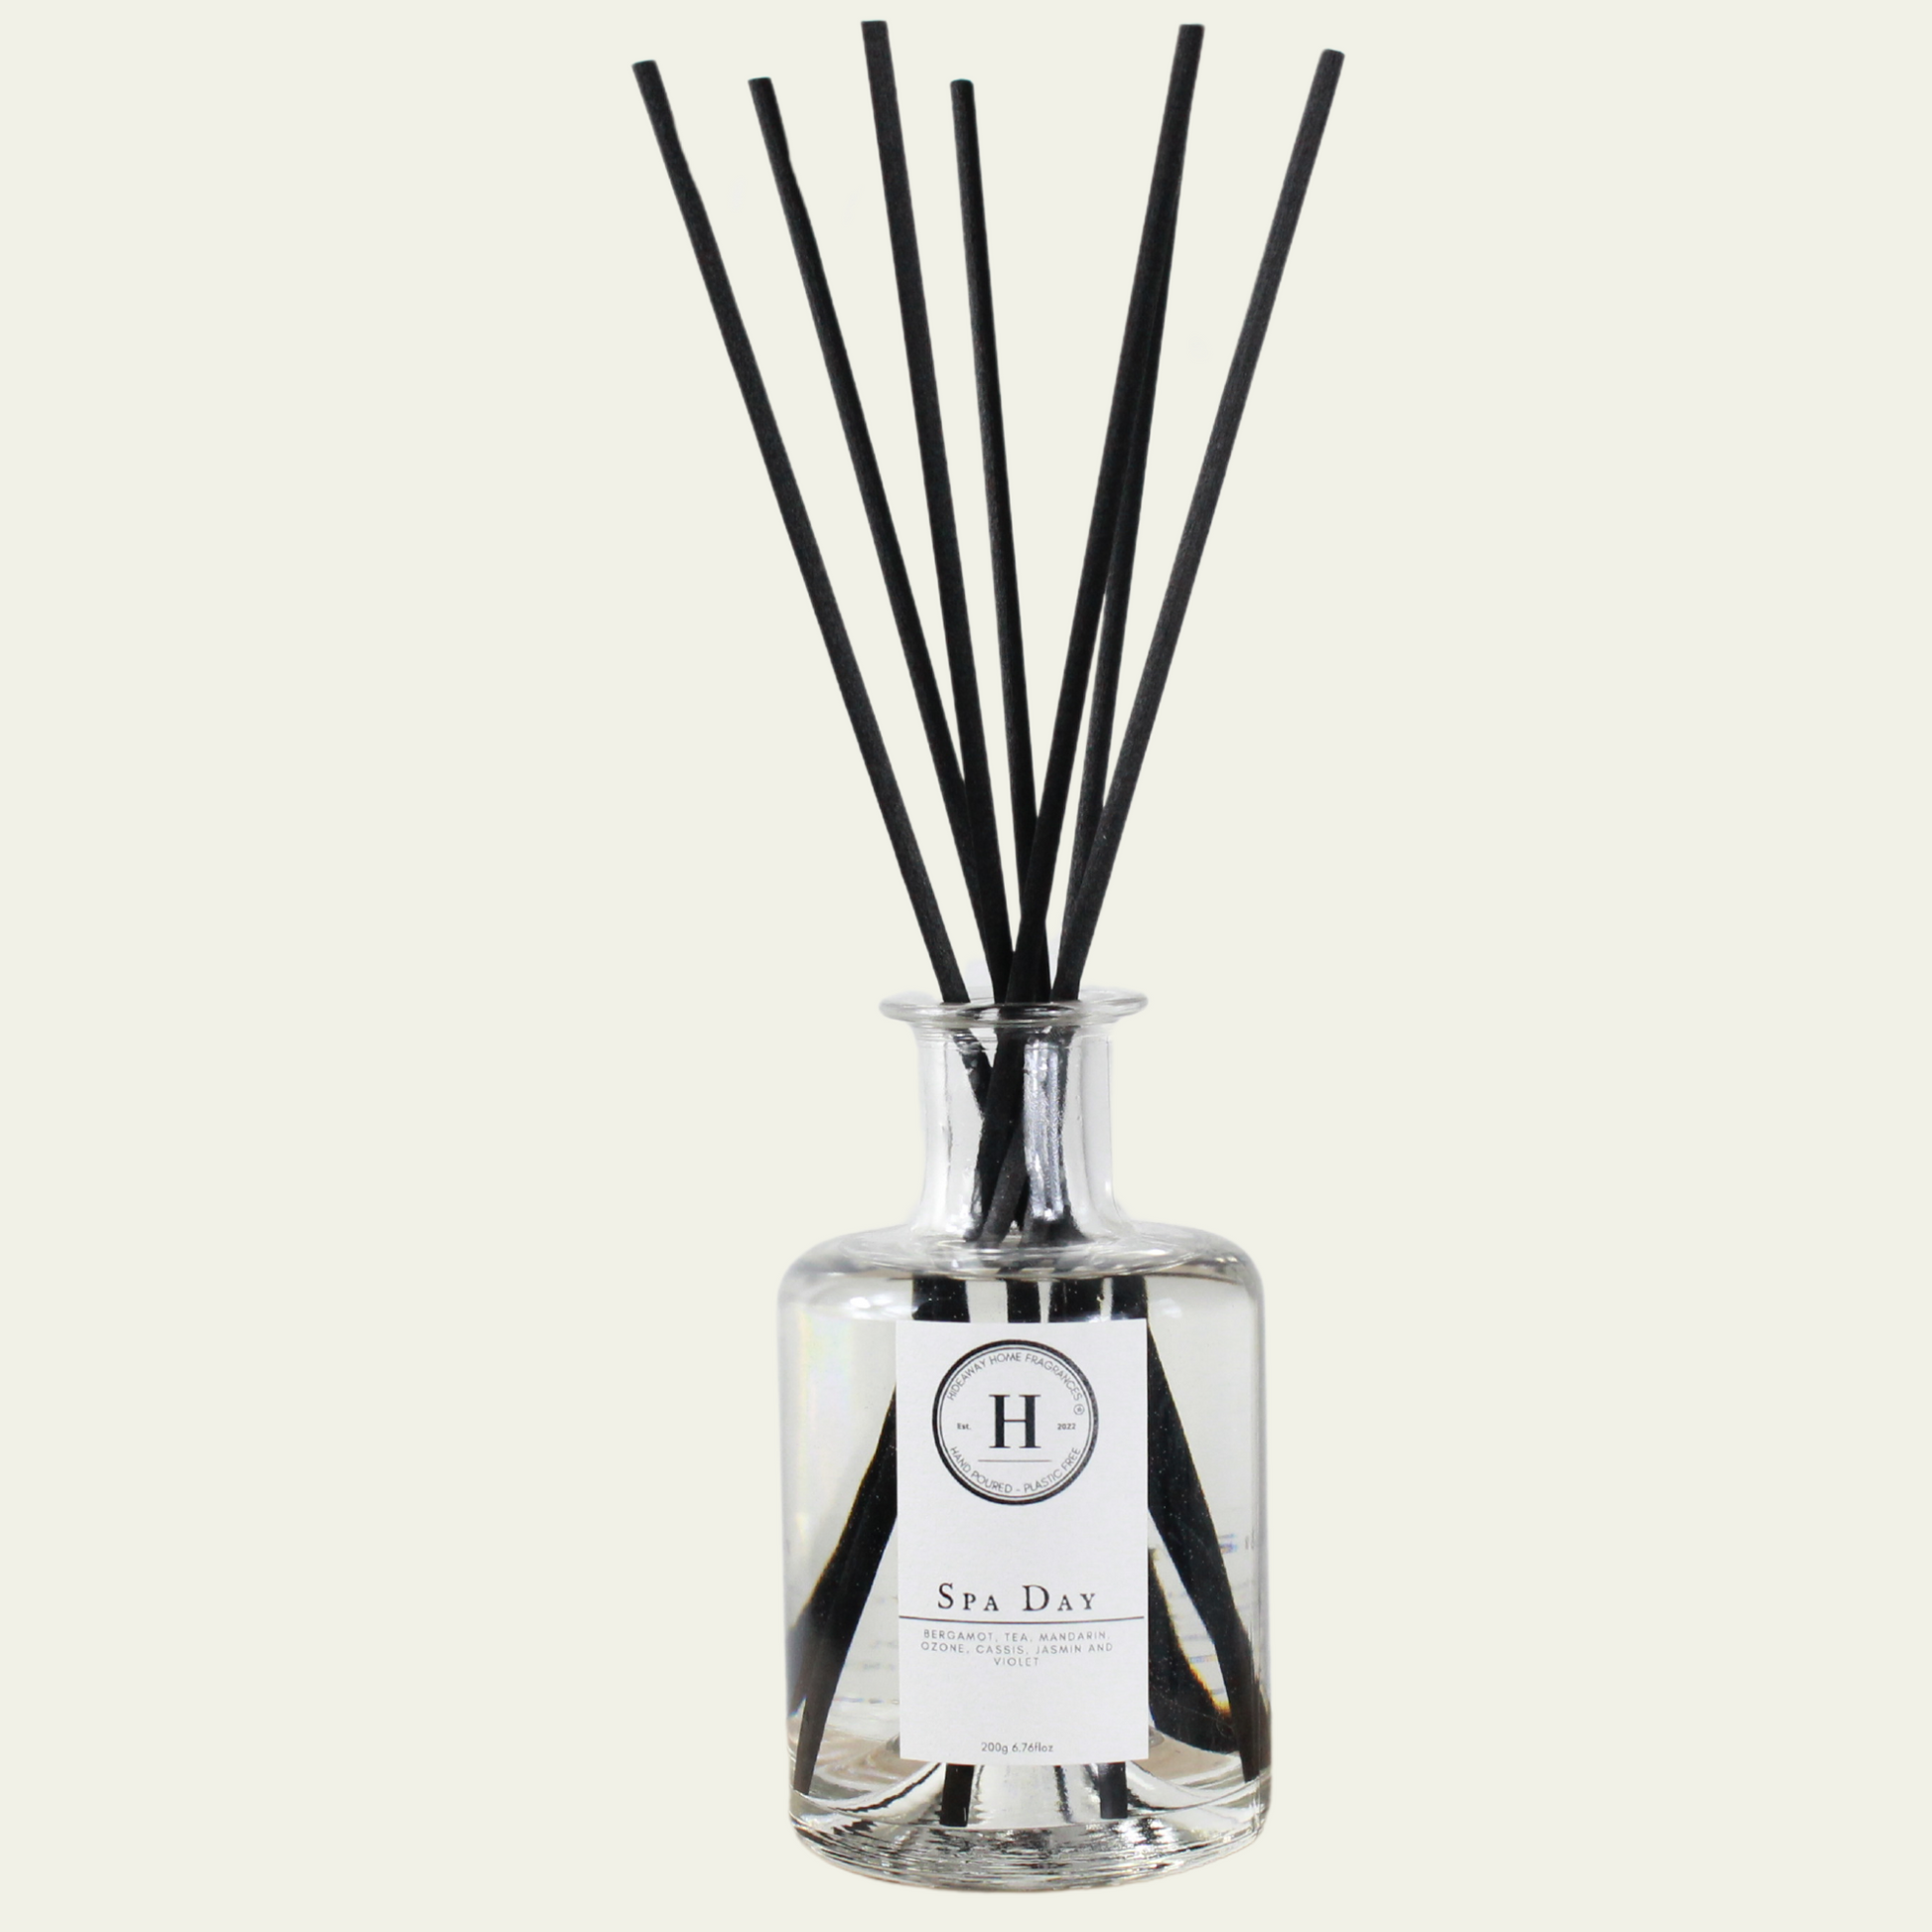 Spa Day Reed Diffuser - Hideaway Home Fragrances